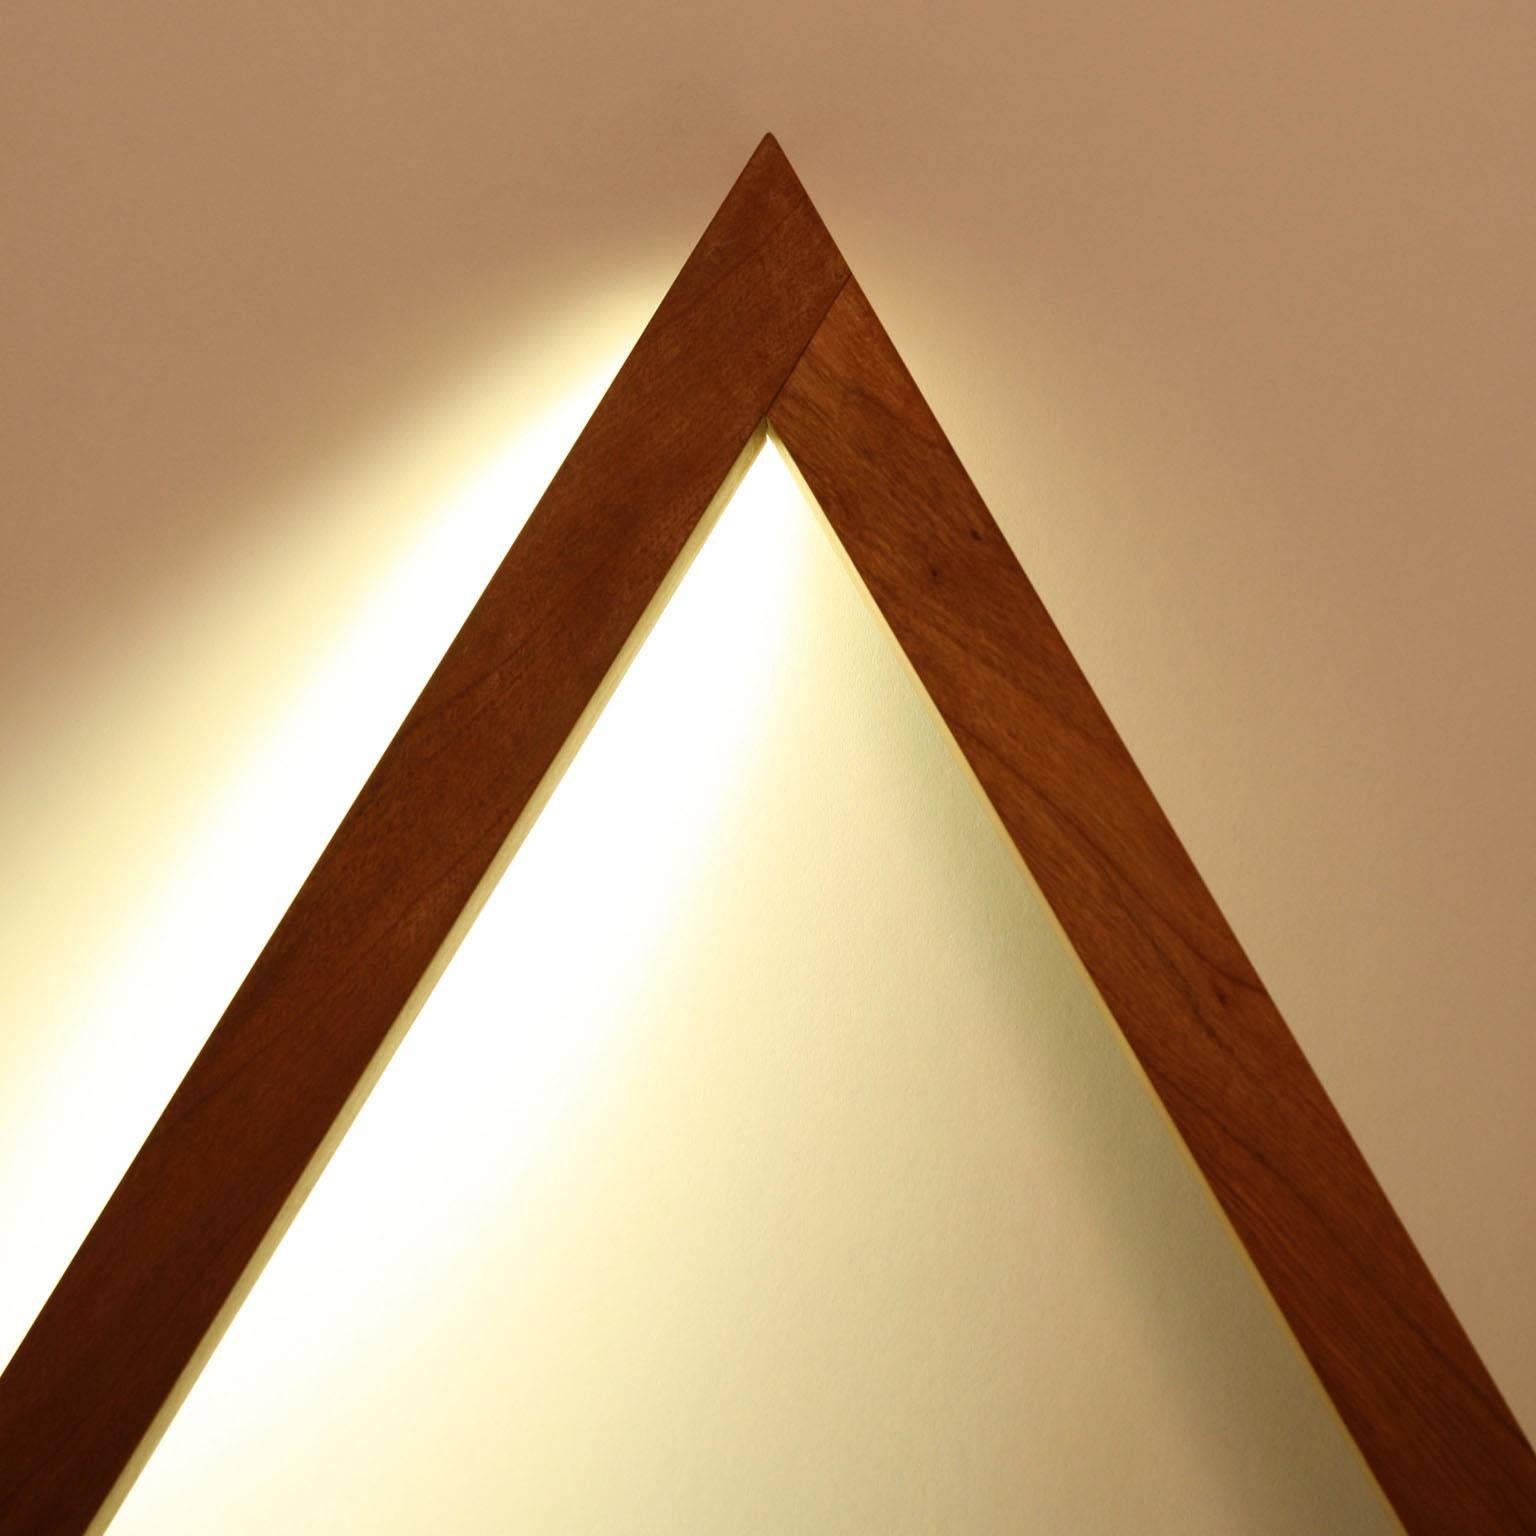 Fort Makers' Triangle 2 Cherry Line Light is made in Brooklyn by Noah Spencer. This sculptural LED light juxtaposes hard lines with soft reflected light and emits an ambient aura. The lifespan of an LED strip is approximately 50,000